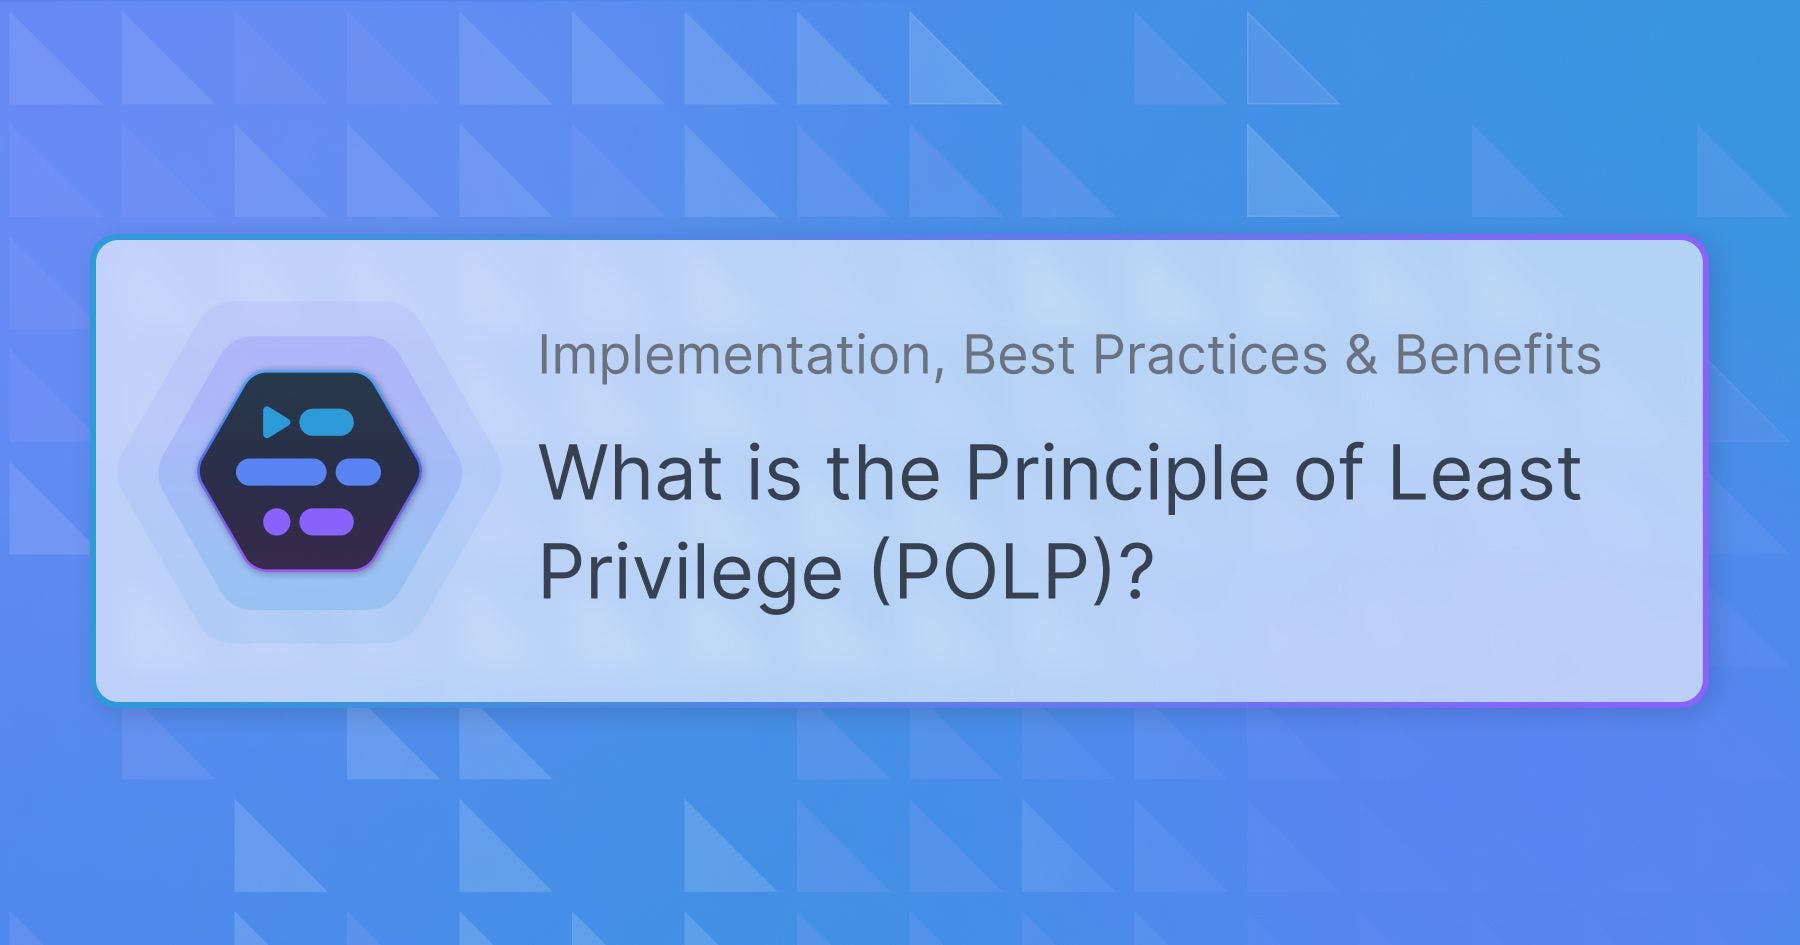 Adaptive Automation Technologies, Inc. - What is the Principle of Least Privilege (POLP)?